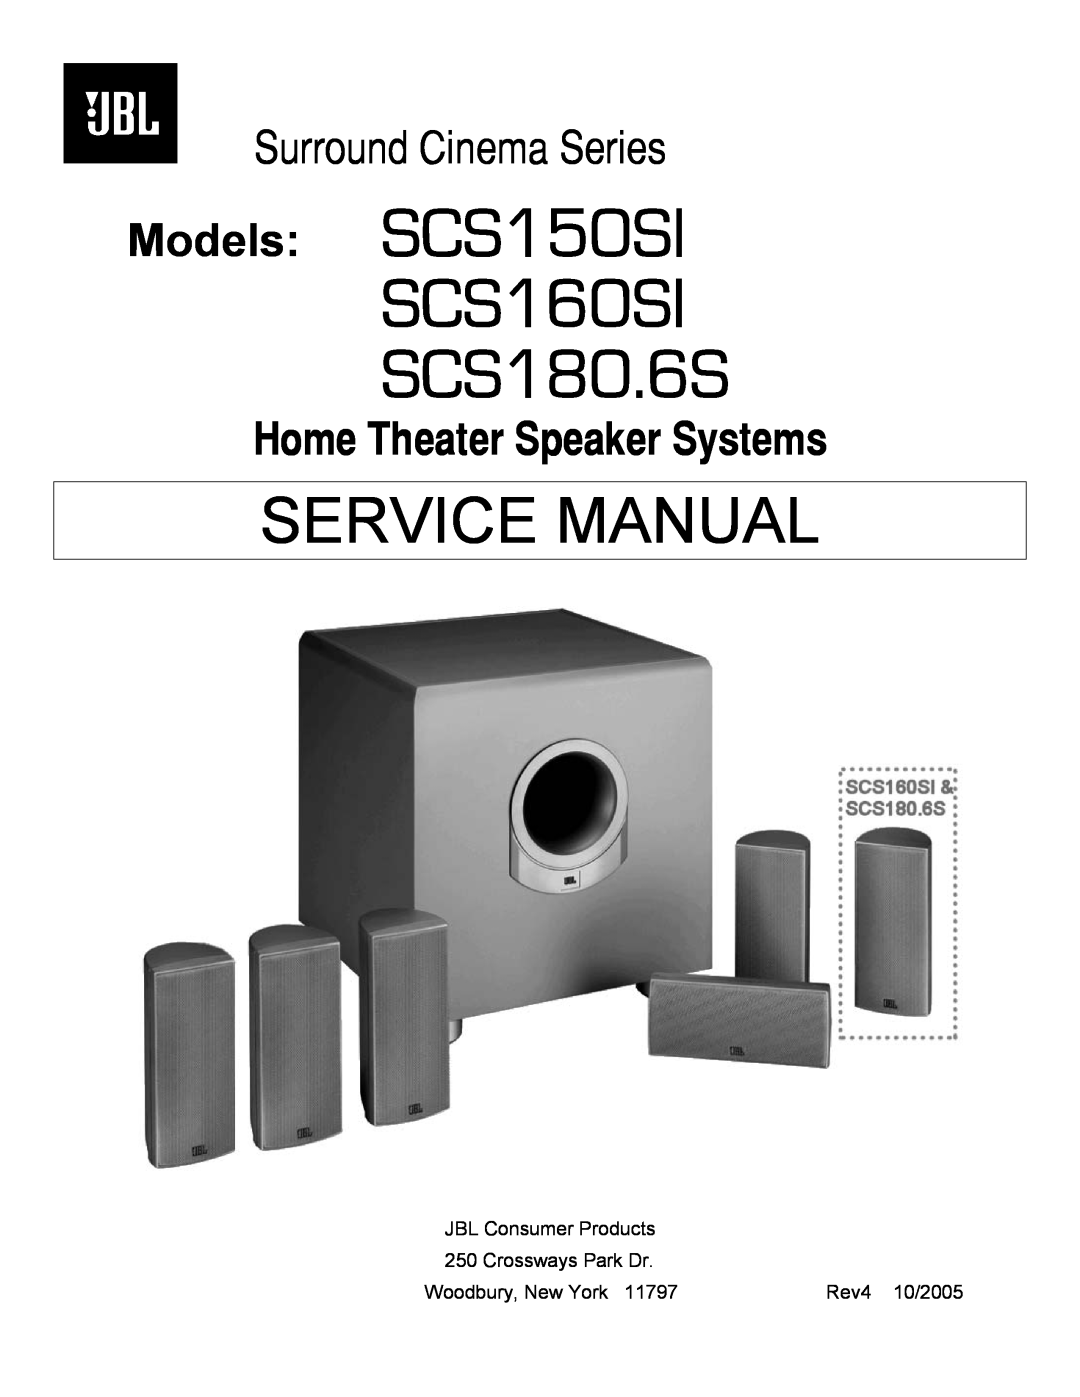 JBL service manual SCS160SI SCS180.6S, Surround Cinema Series, Models SCS150SI, Home Theater Speaker Systems 